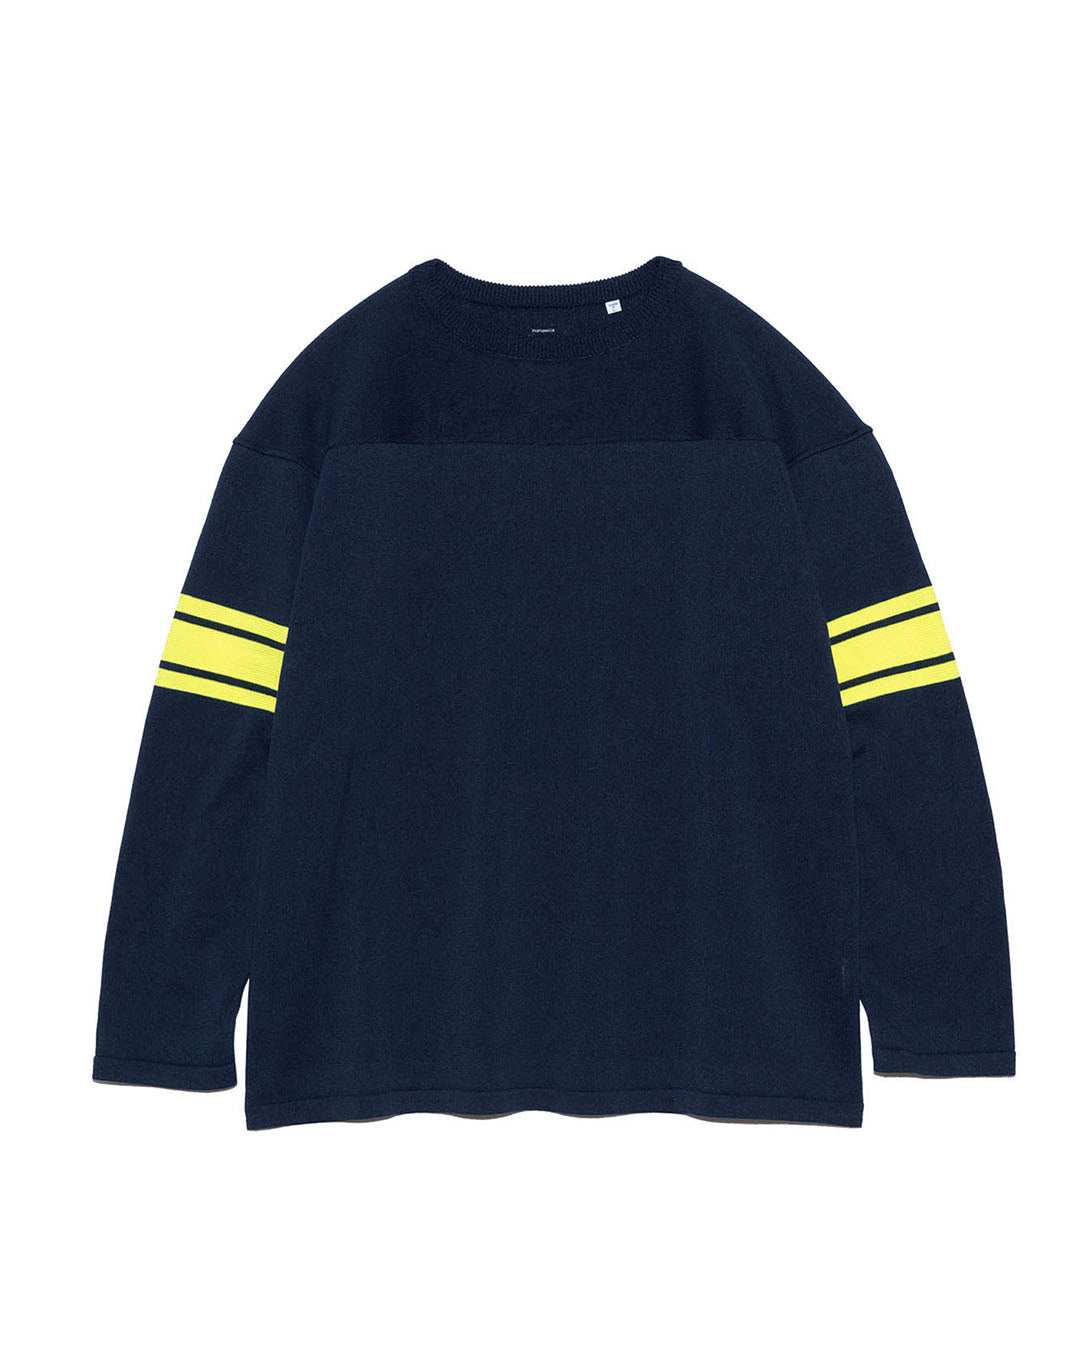 【NANAMICA】MIDSHIPMAN ATHLETIC SWEATER - NAVY